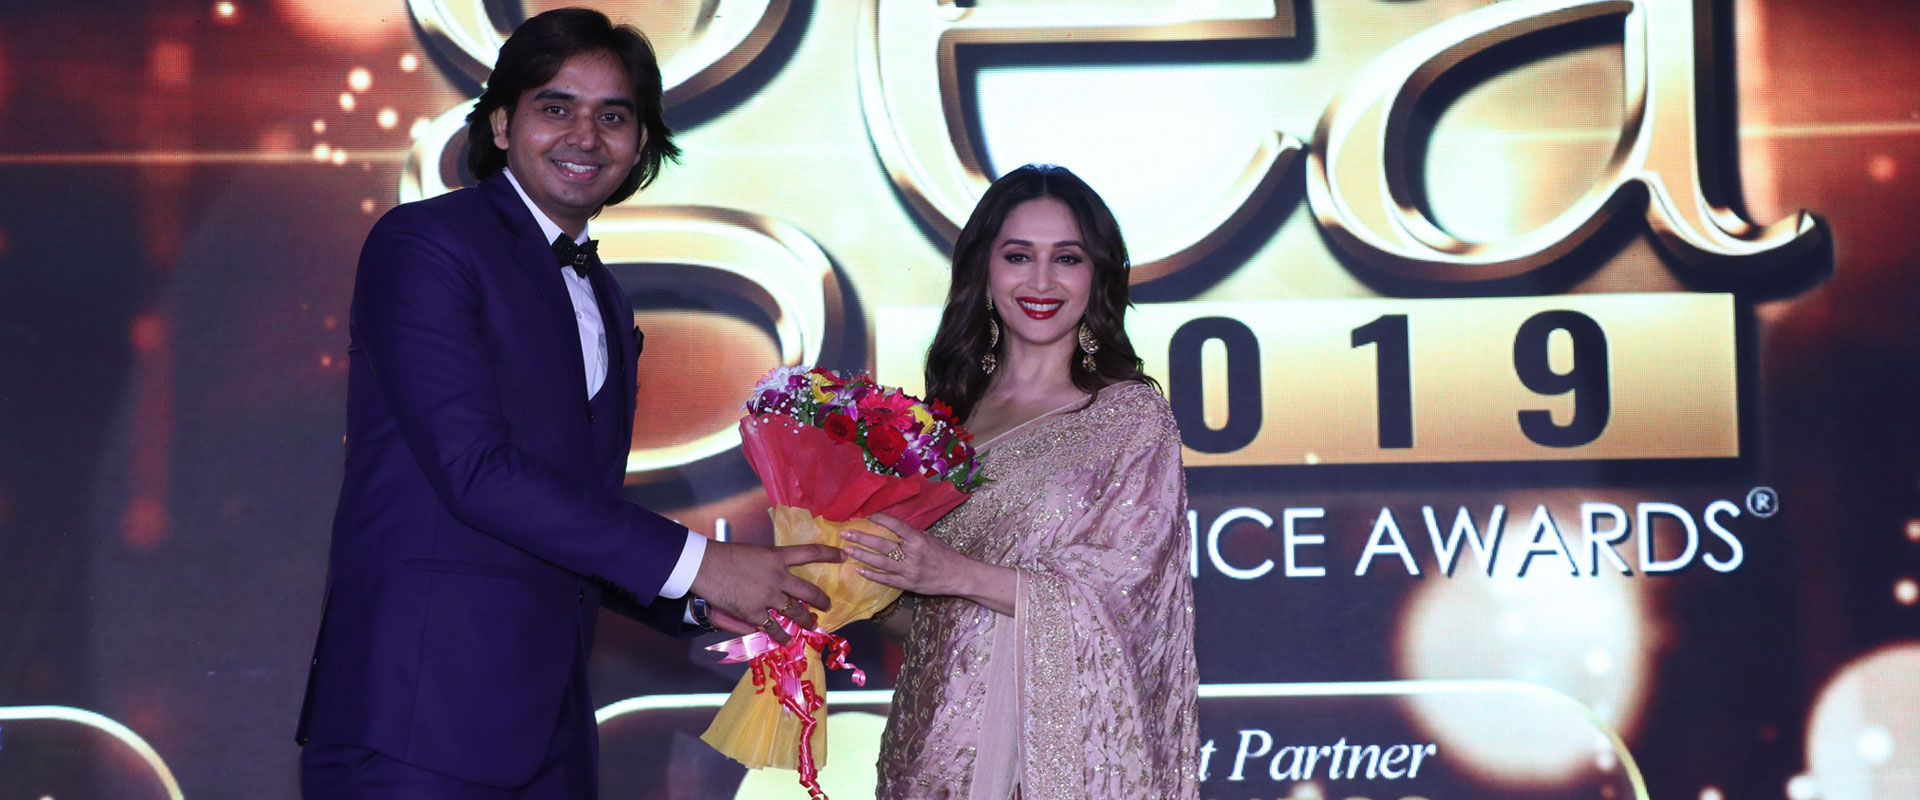 Rahul Ranjan Singh (Founder, CEO) Welcomes Madhuri Dixit Nene (Chief Guest)